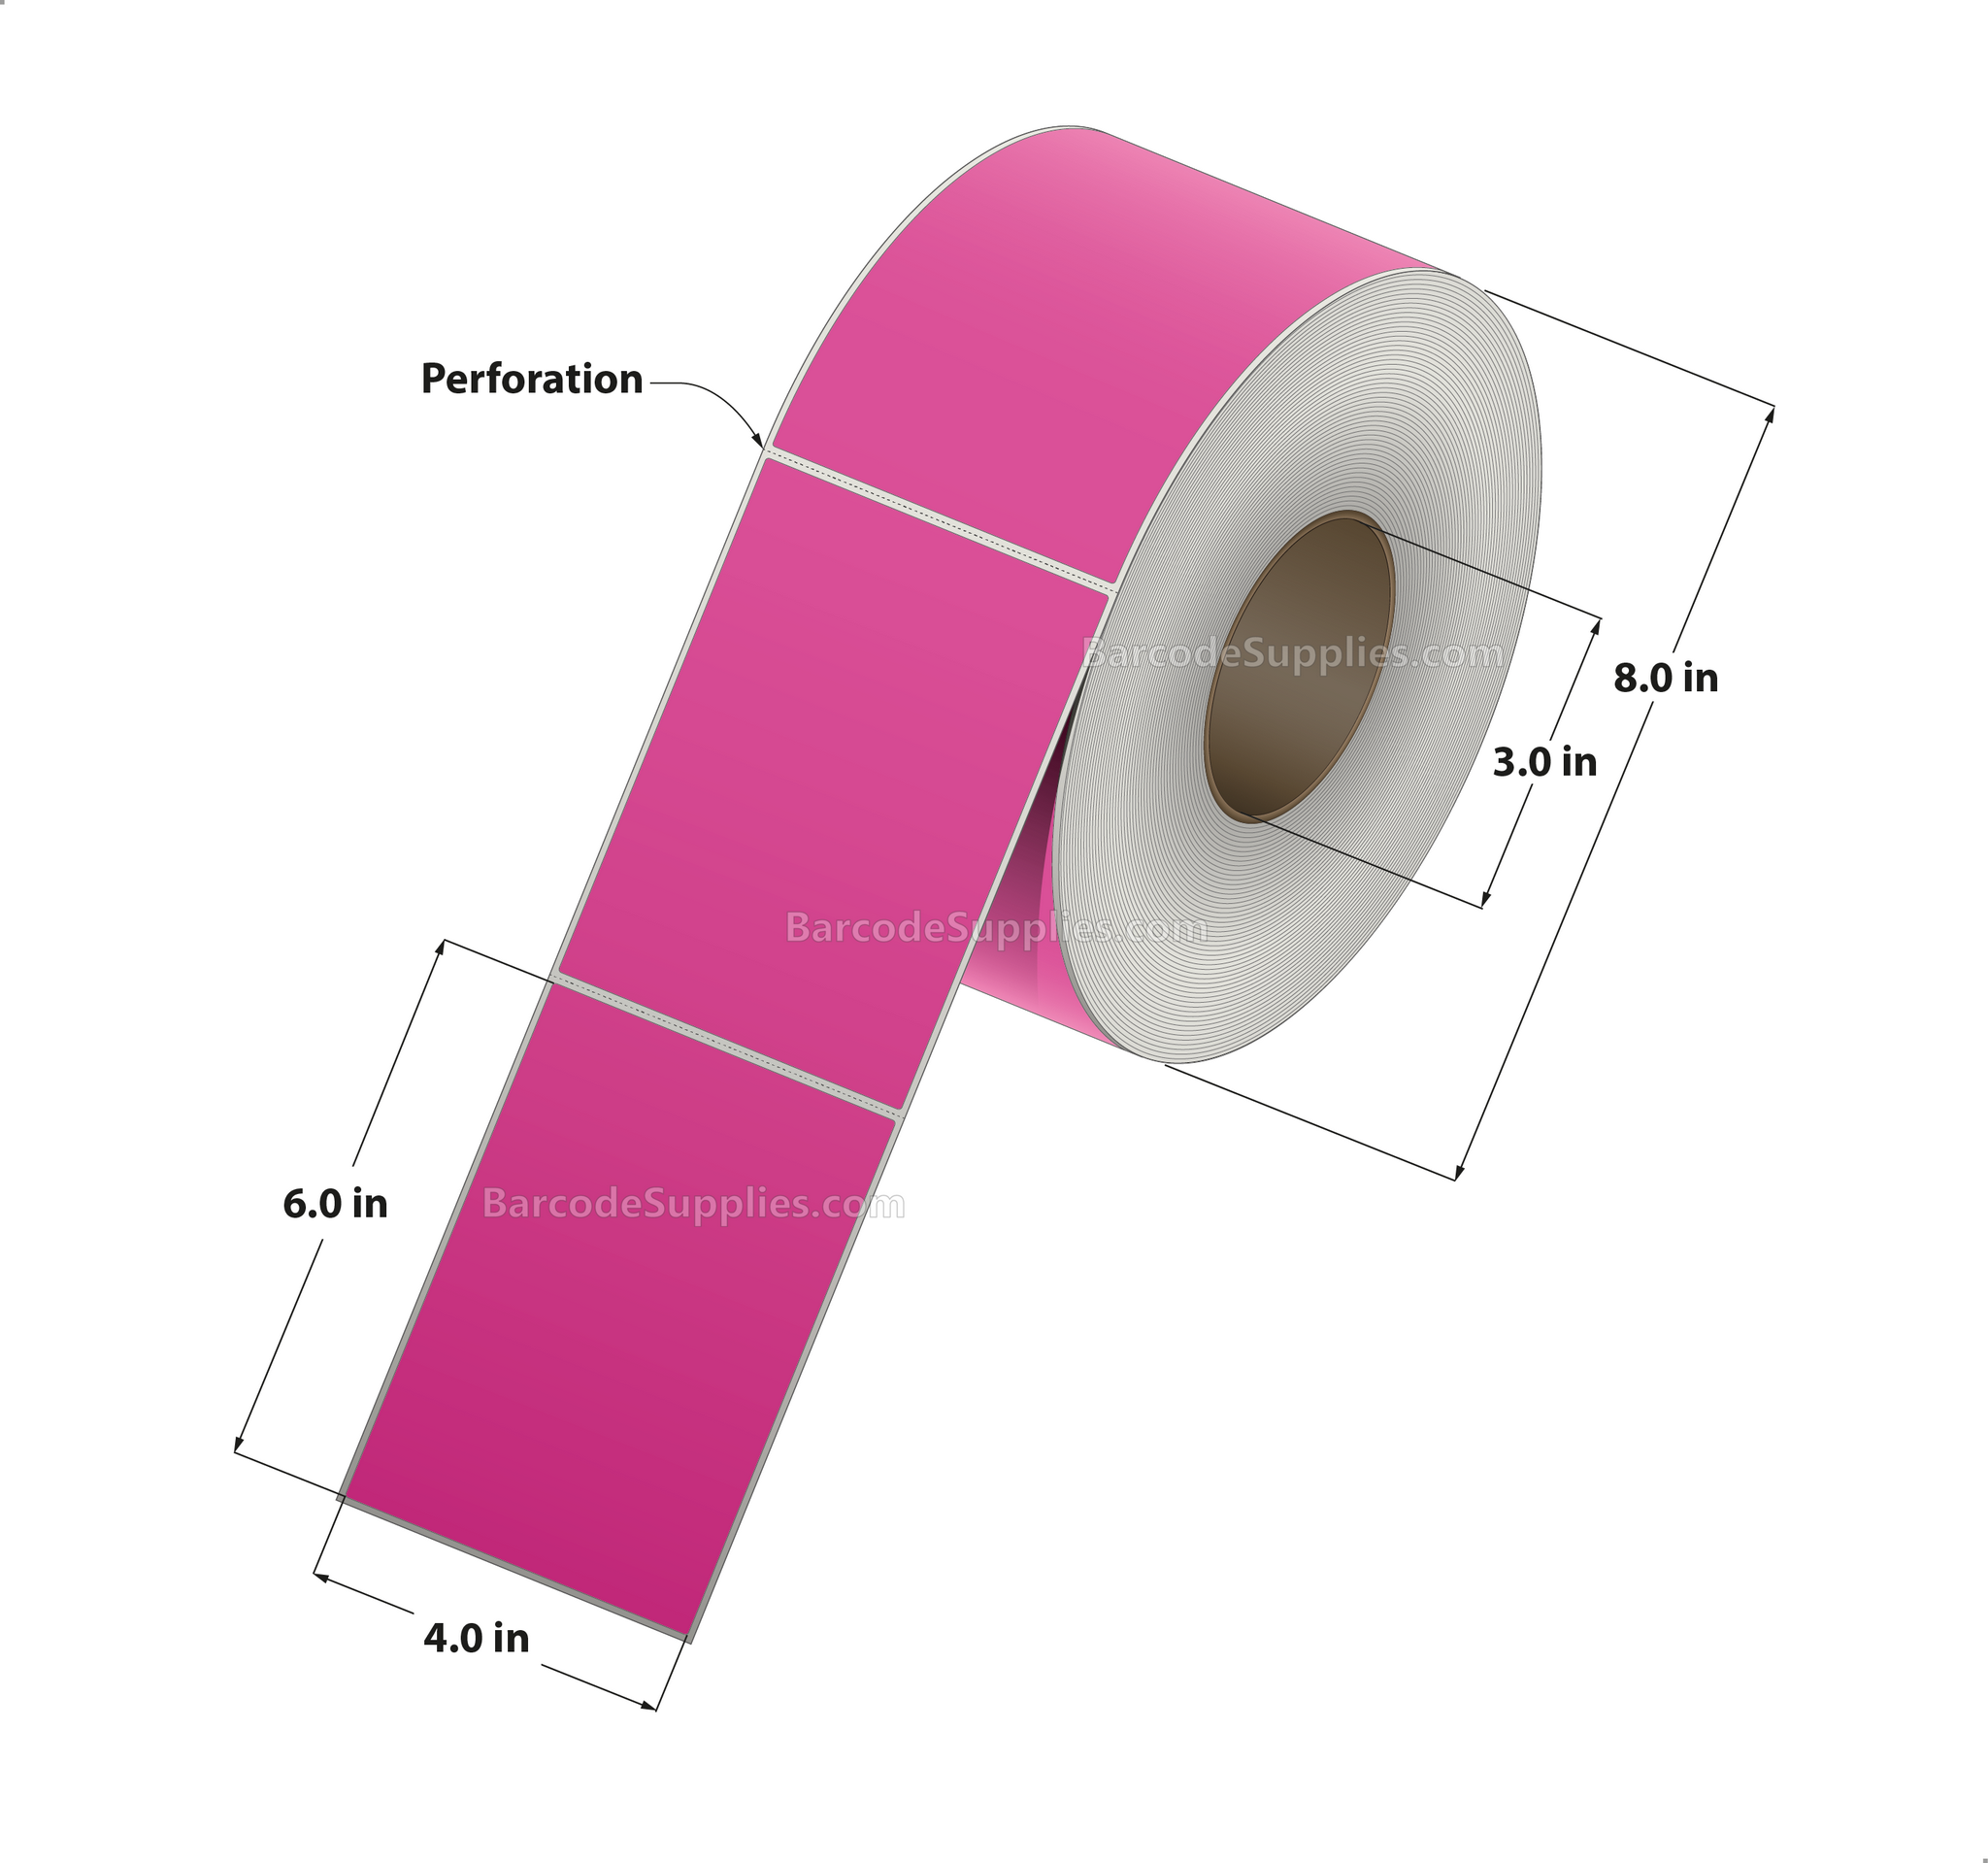 4 x 6 Thermal Transfer Fluorescent Pink Labels With Permanent Acrylic Adhesive - Perforated - 1000 Labels Per Roll - Carton Of 4 Rolls - 4000 Labels Total - MPN: TH46-1PFP